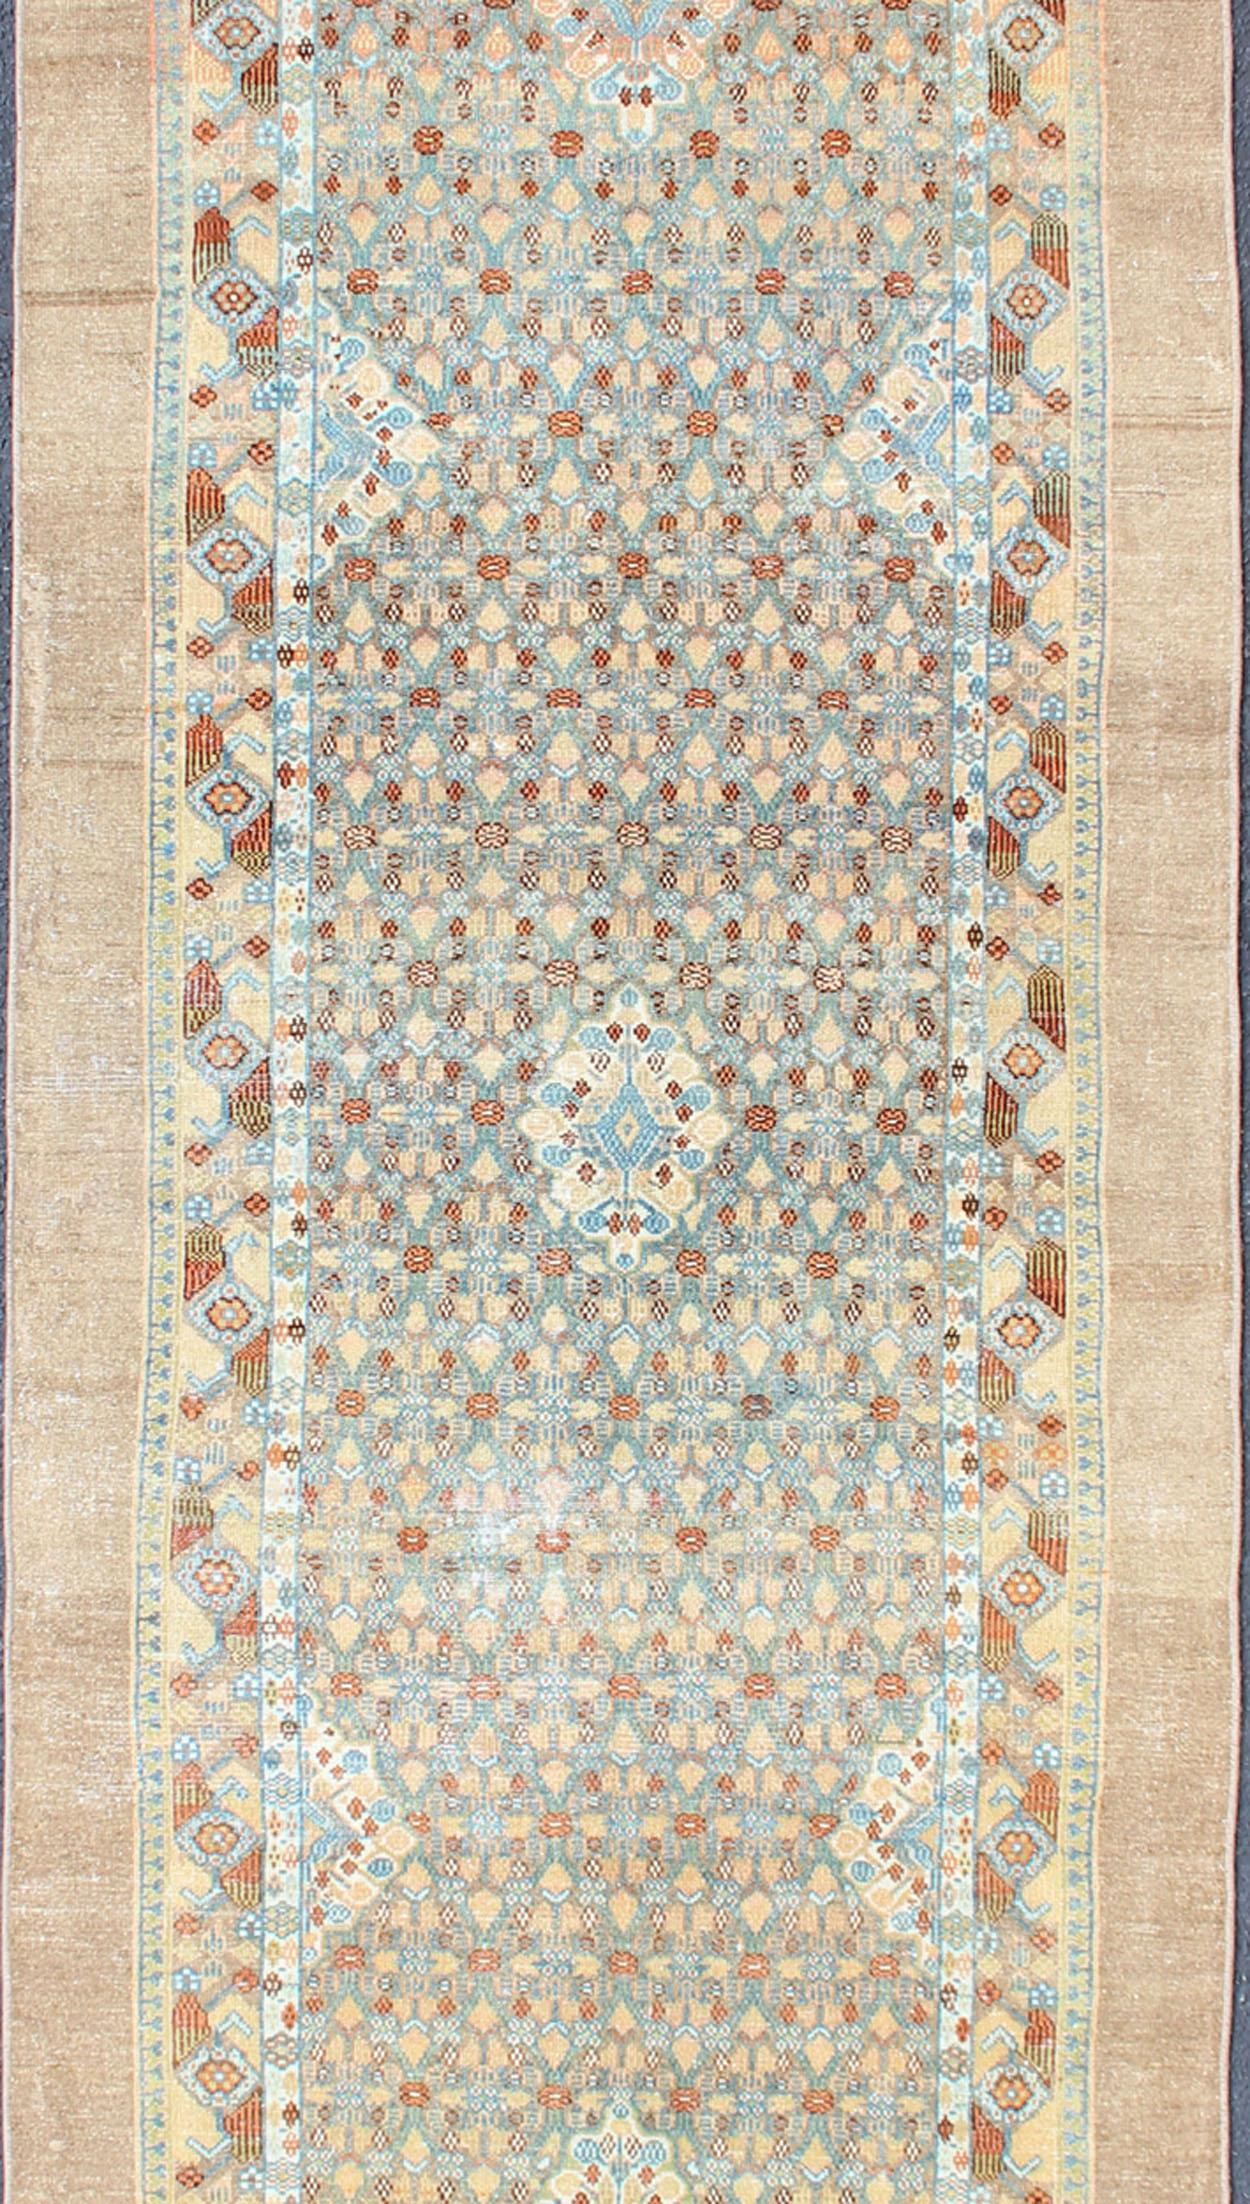 Geometric design Serab antique runner from Persia in multicolored light Tones, rug SUS-2009-643, country of origin / type: Iran / Serab, circa 1900.

This beautiful handwoven, antique Persian Serab runner features a central field imbued with an